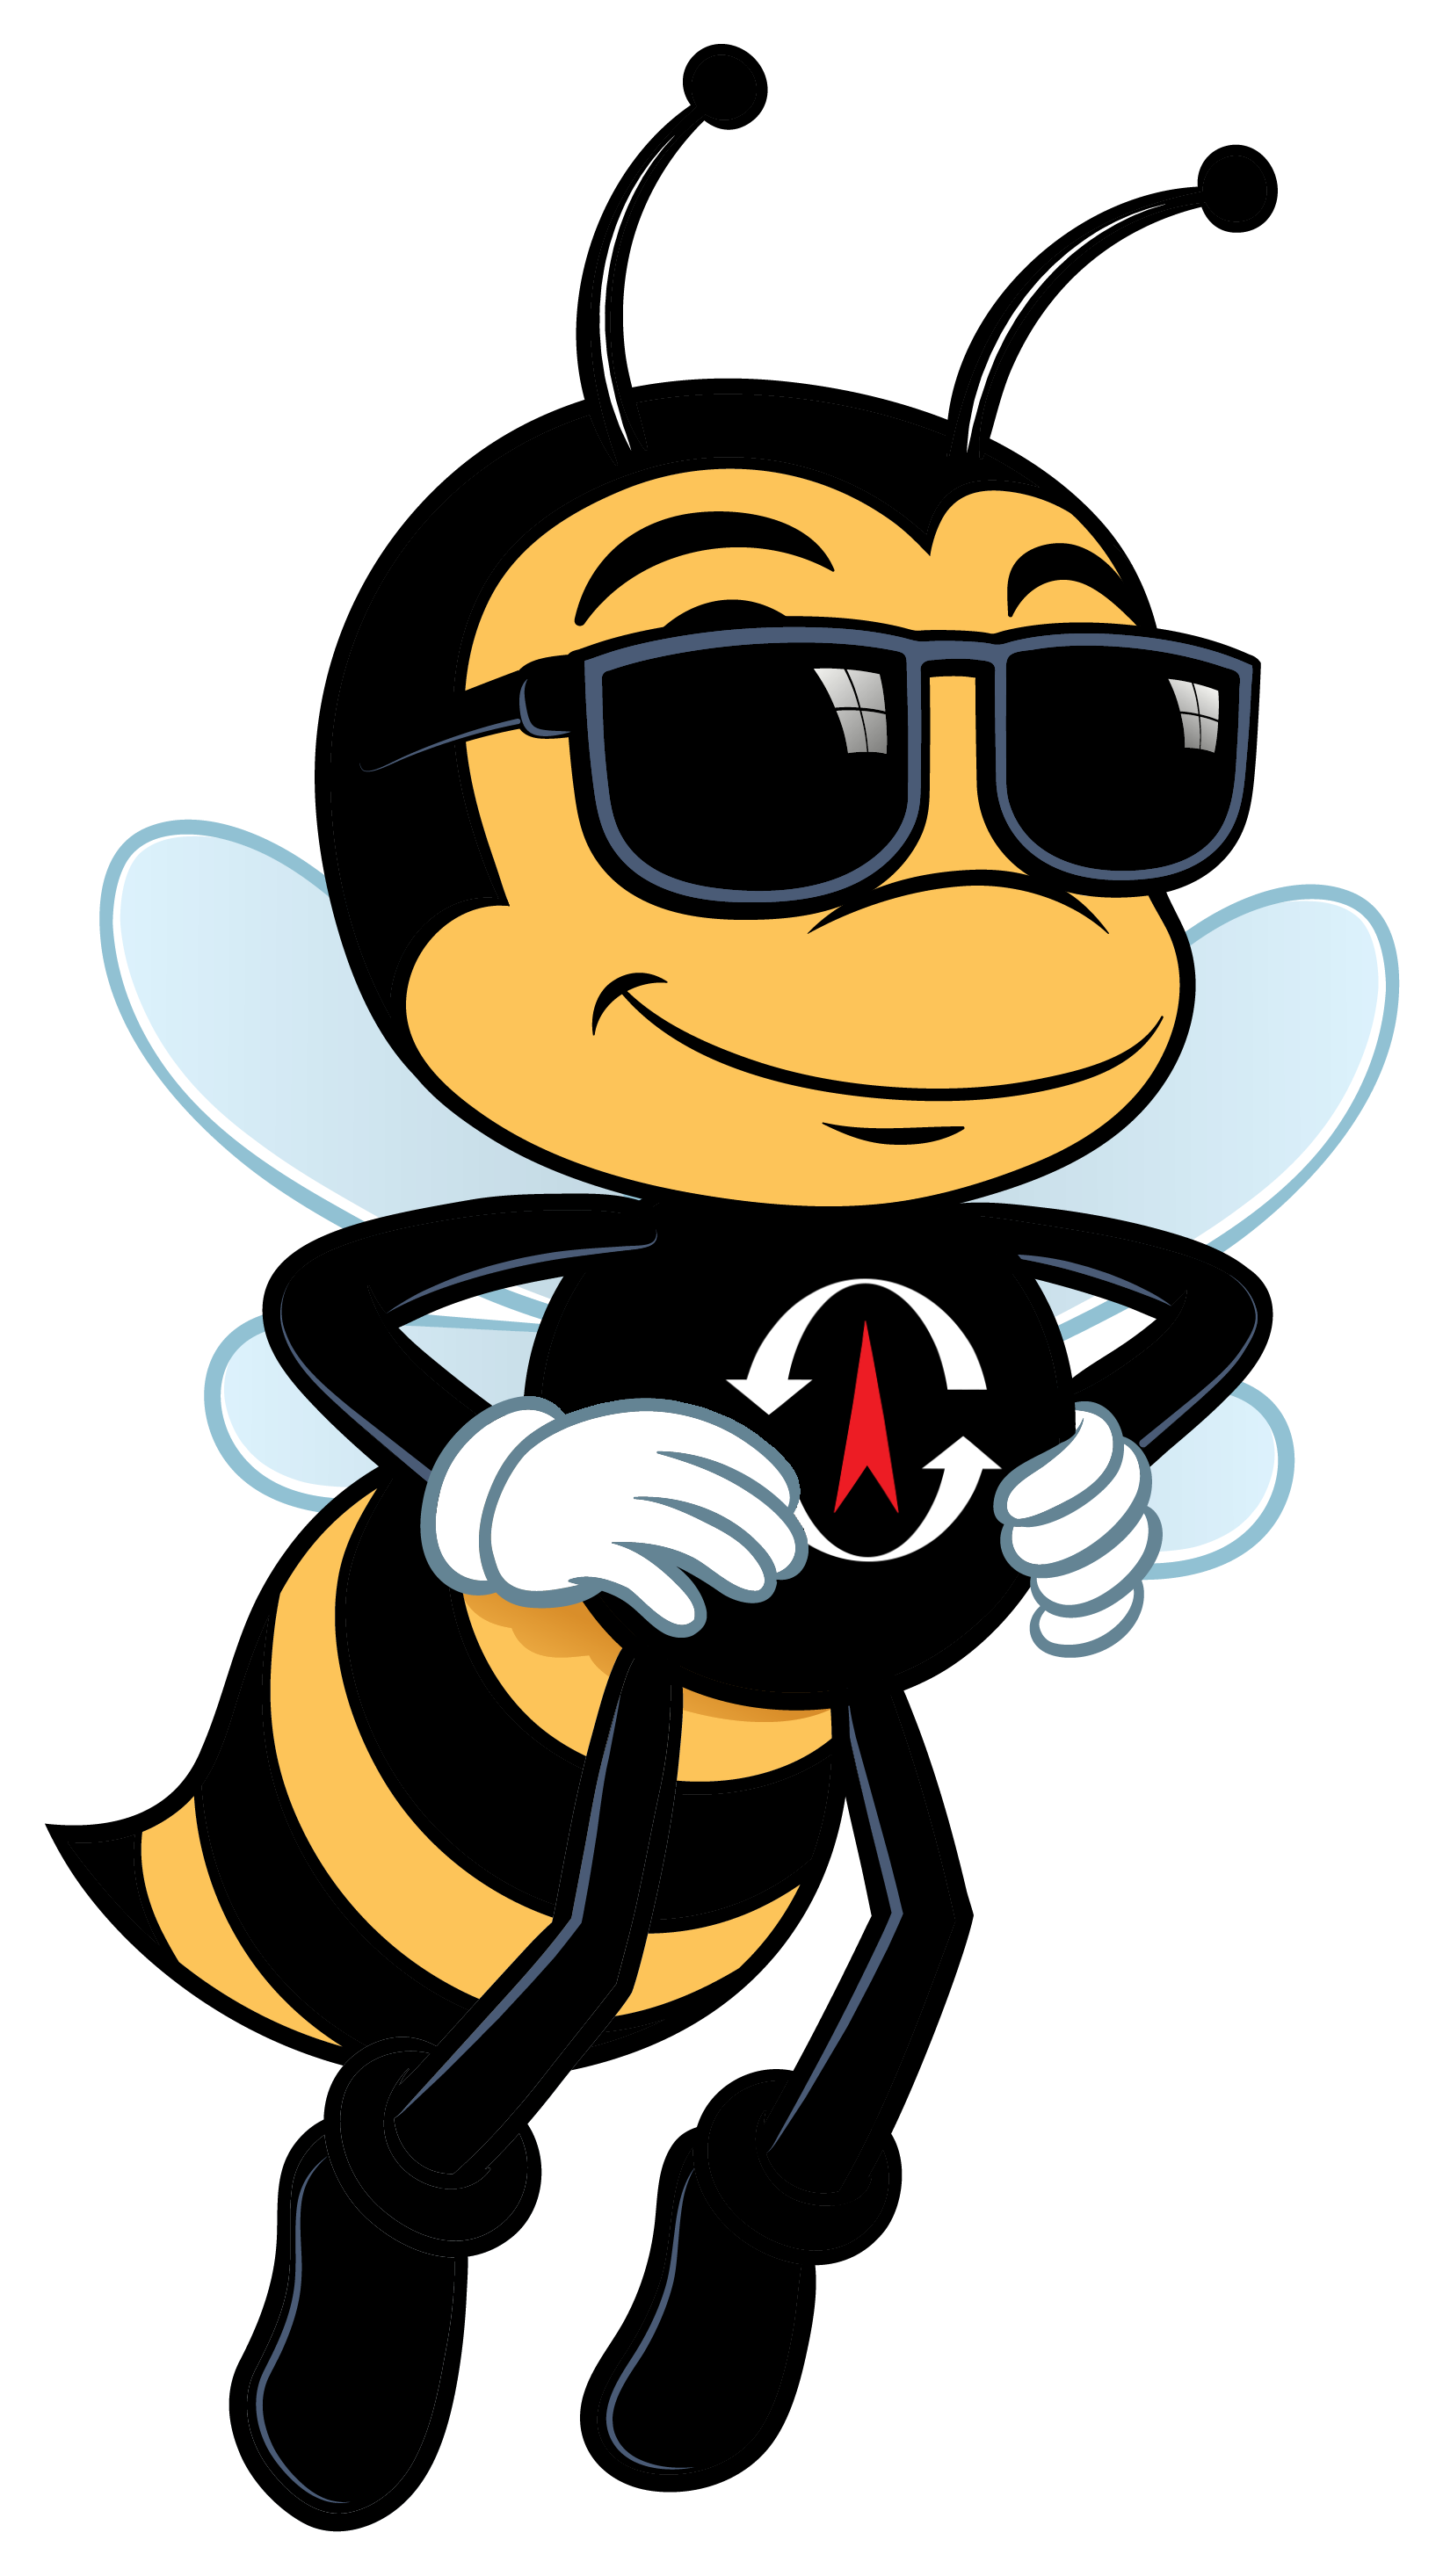 Billy the Bee